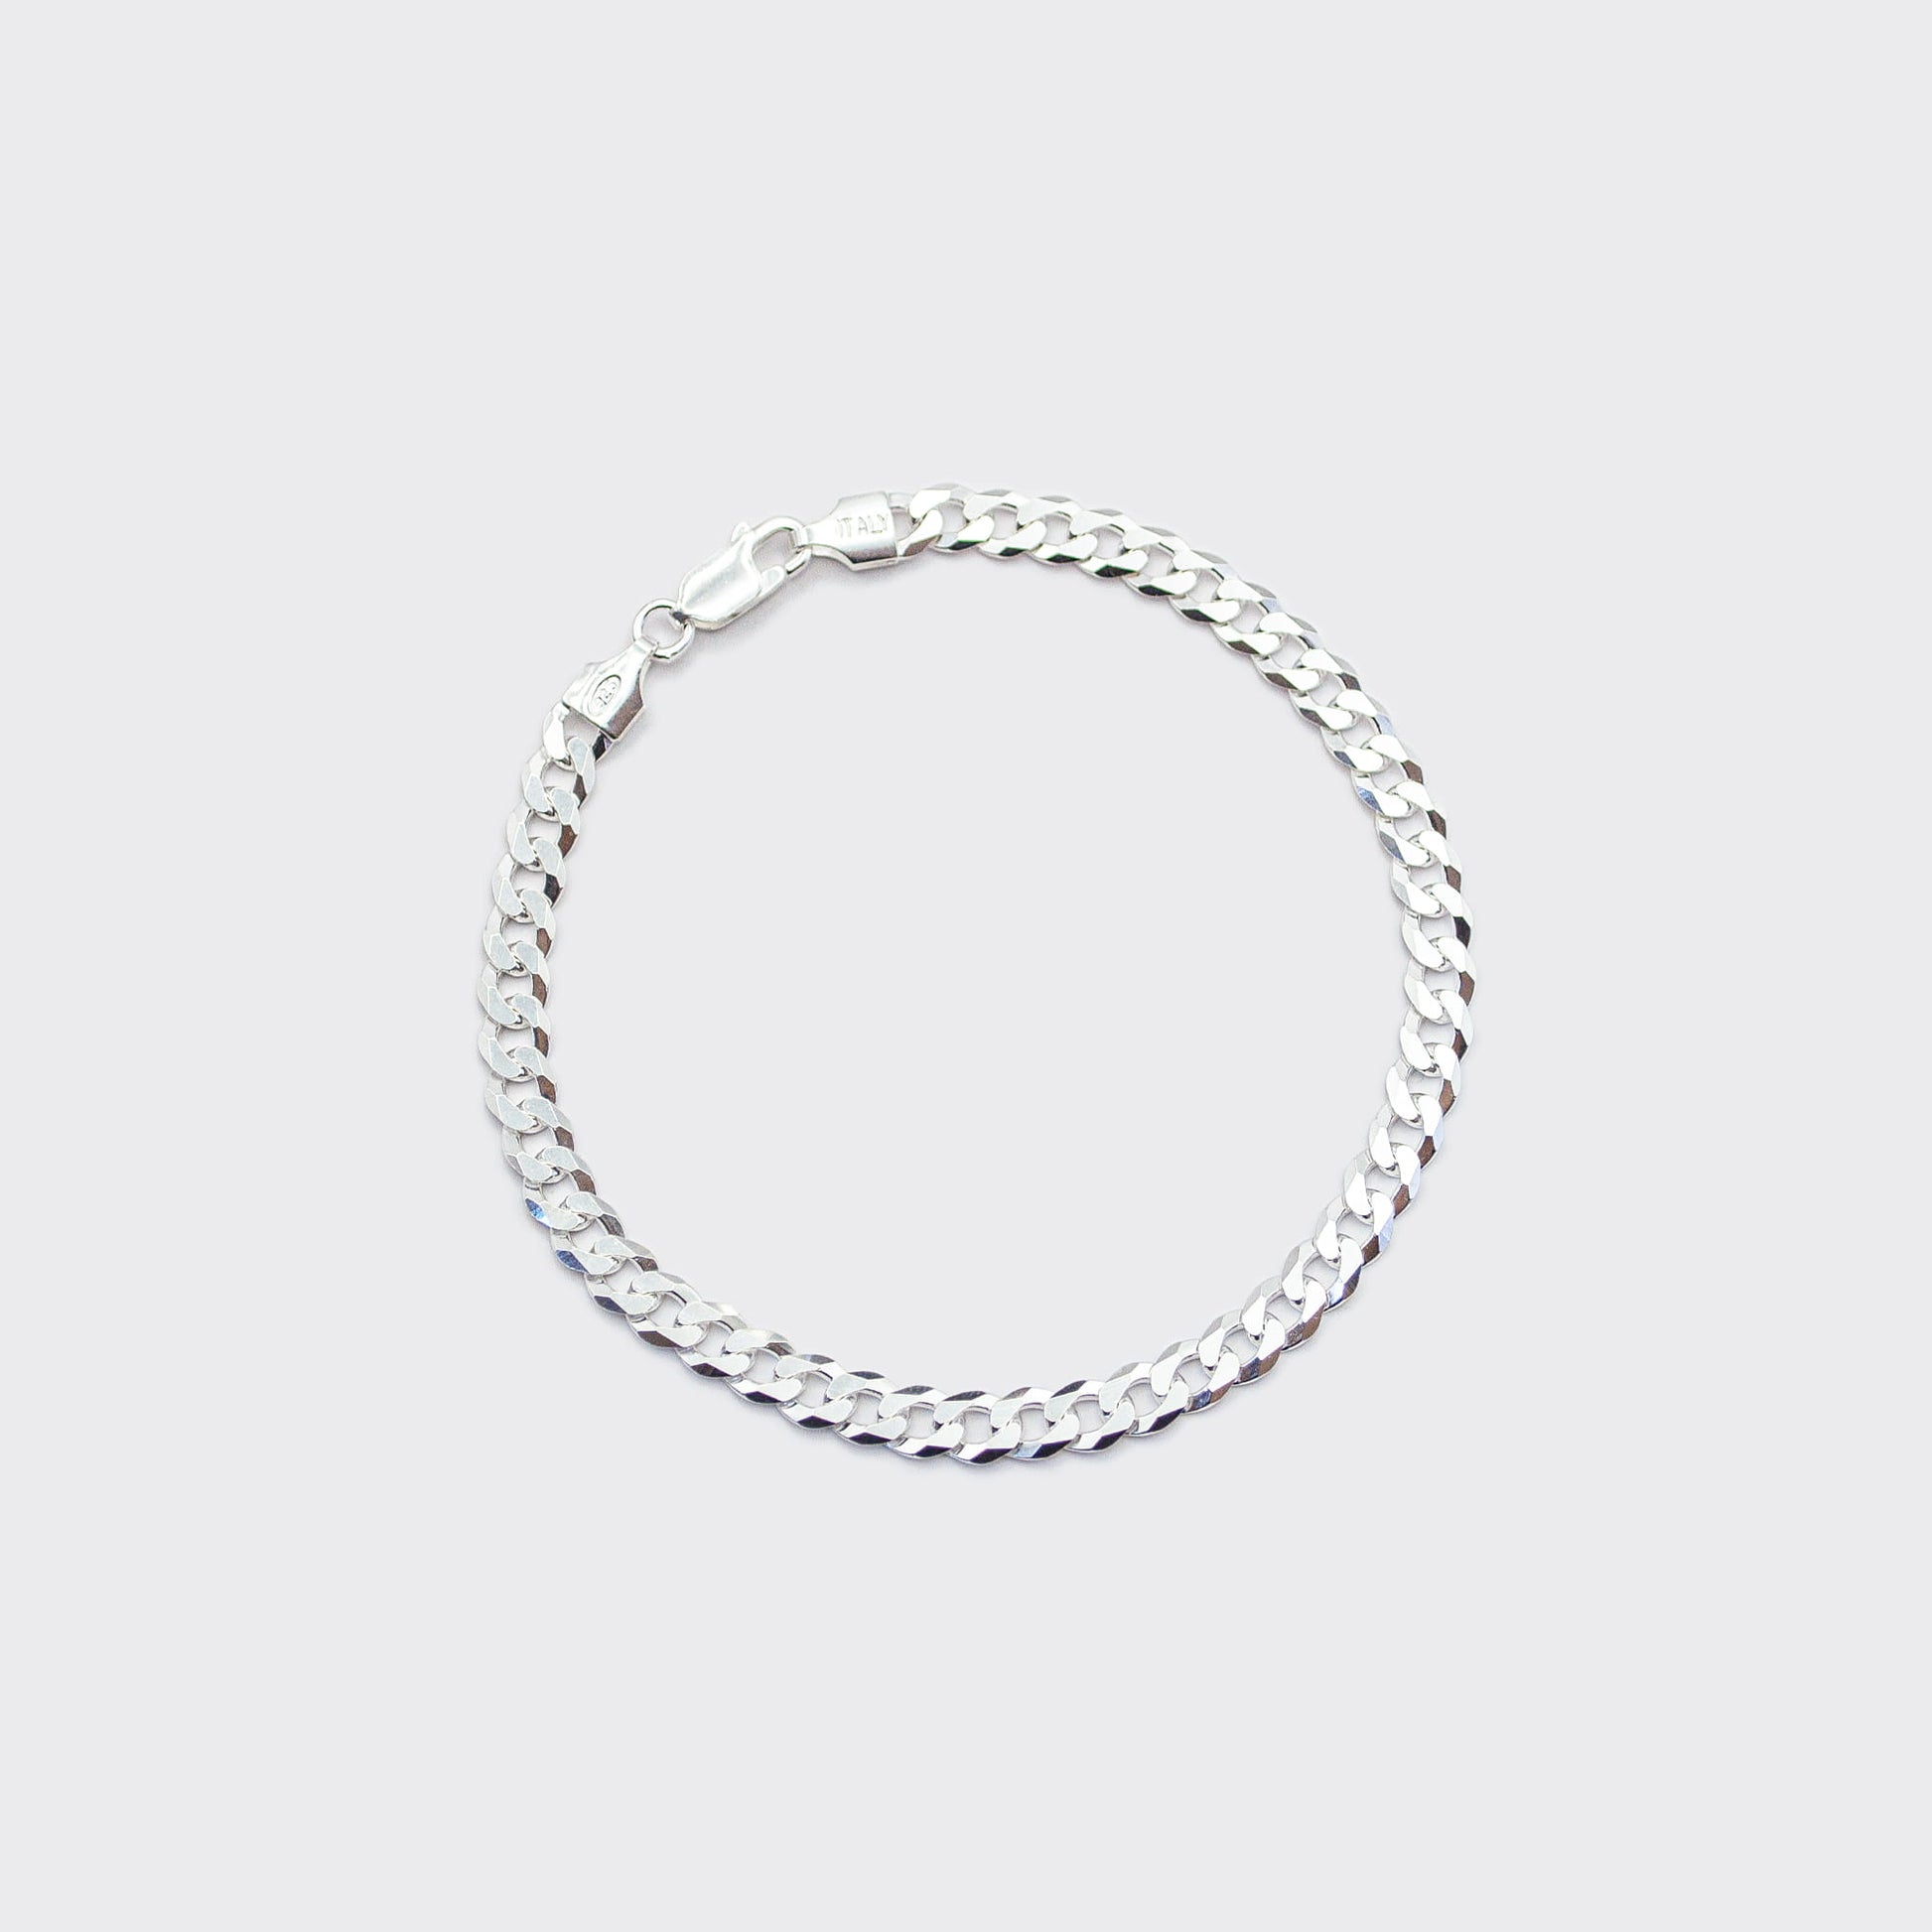 The Cuban bracelet is made of 925 sterling silver. The bracelet is handcrafted in Italy and made for both men and women.